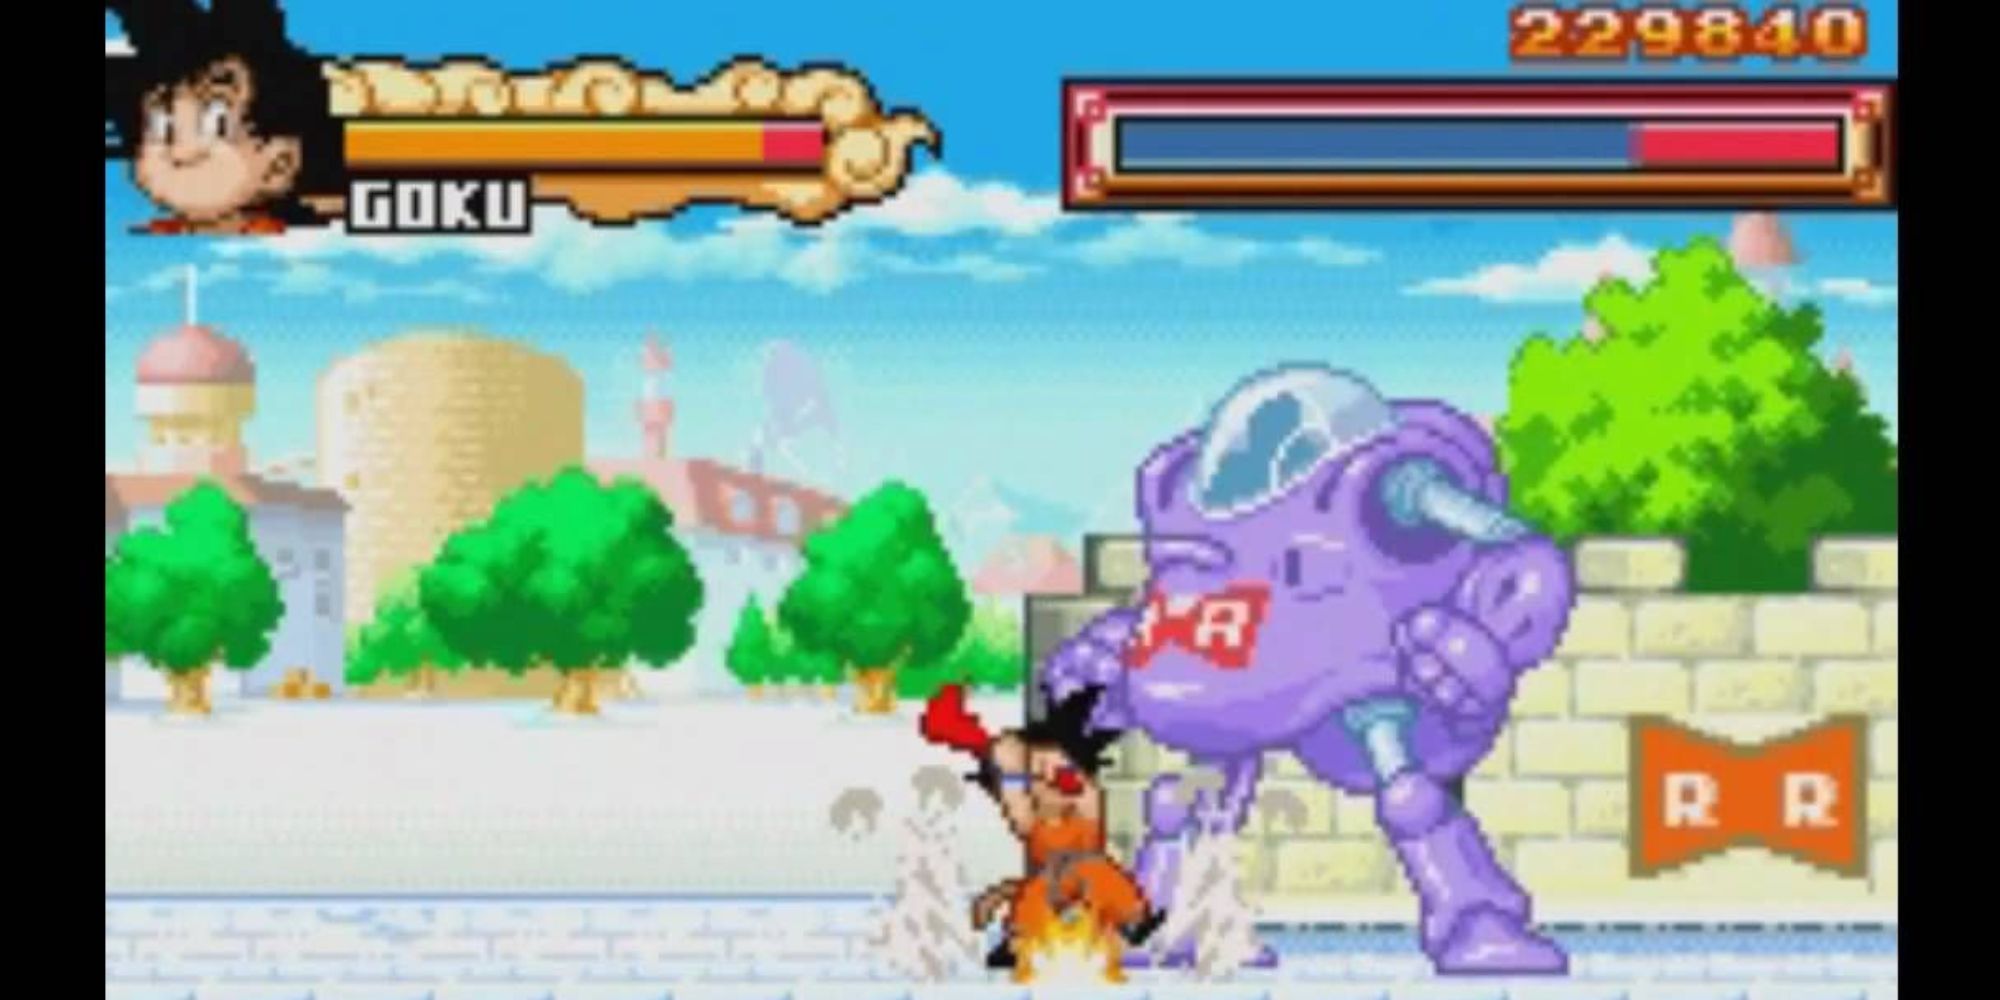 Goku Fighting a Red Ribbon Army robot.